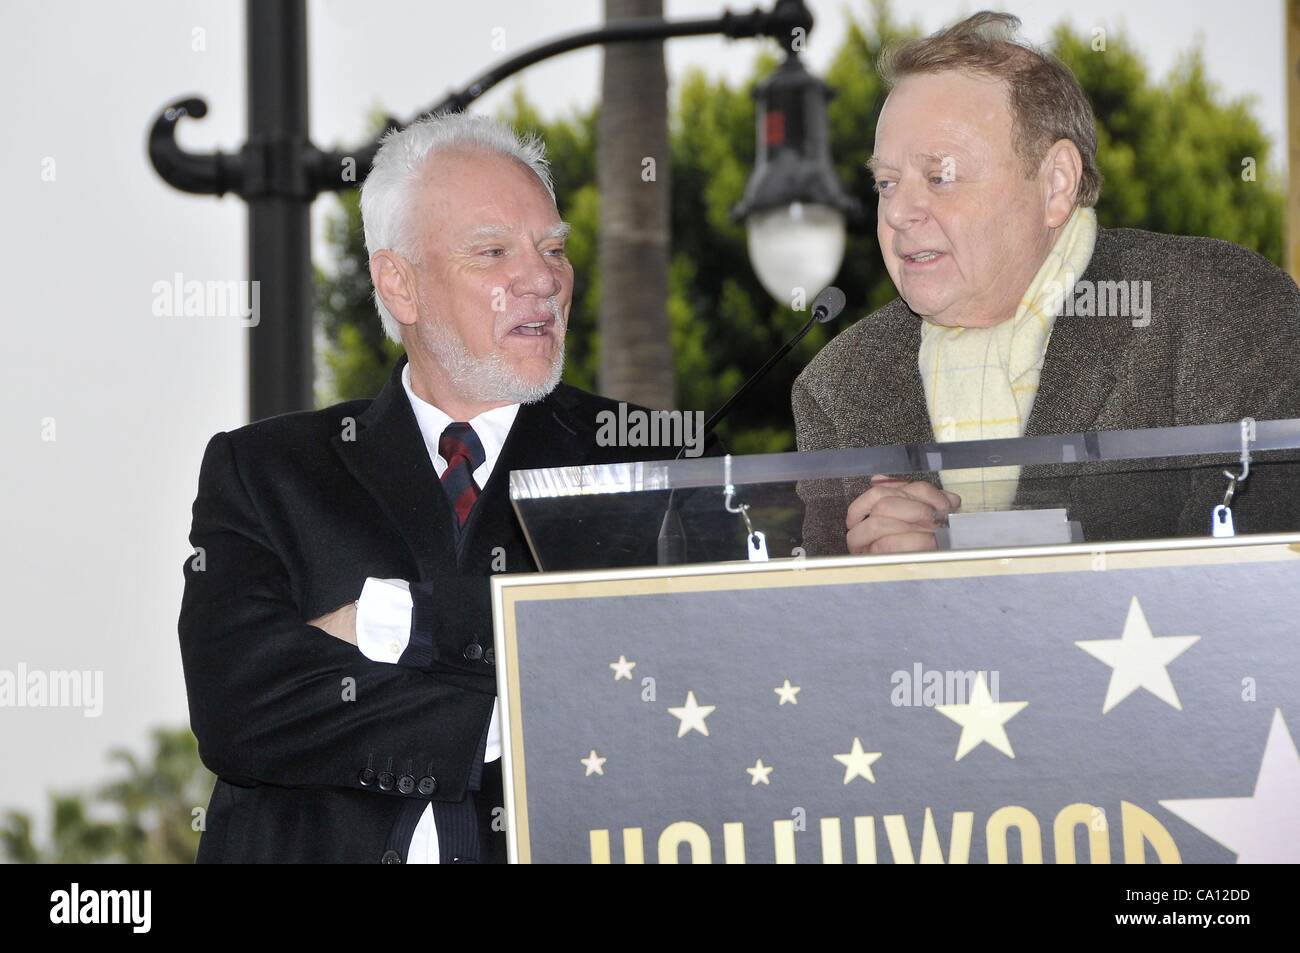 Malcolm McDowell, Mike Kaplan at the induction ceremony for Star on the Hollywood Walk of Fame for Malcolm McDowell, Hollywood Boulevard, Los Angeles, CA March 16, 2012. Photo By: Michael Germana/Everett Collection Stock Photo